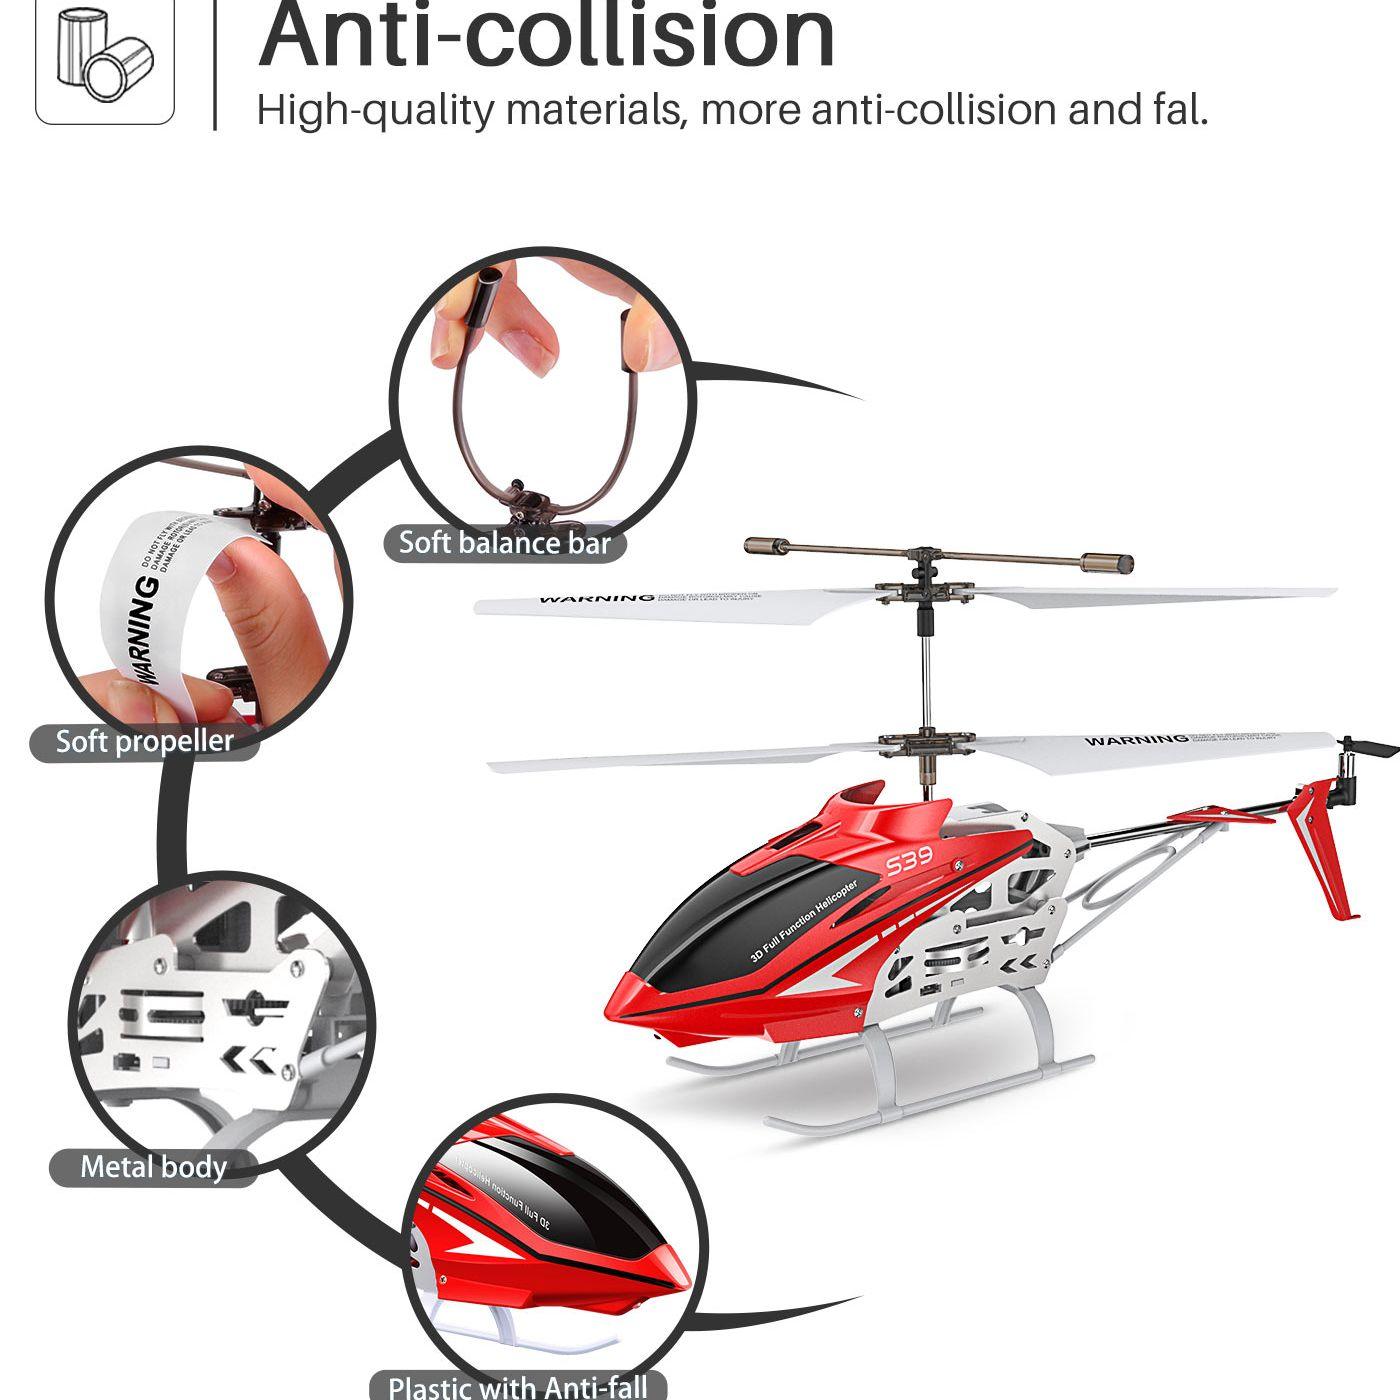 SYMA RC Helicopter S39 Aircraft - with 3.5 Channel Bigger Size Sturdy Alloy Material Gyro Stabilizer and High&Low Speed Drone - RCDrone